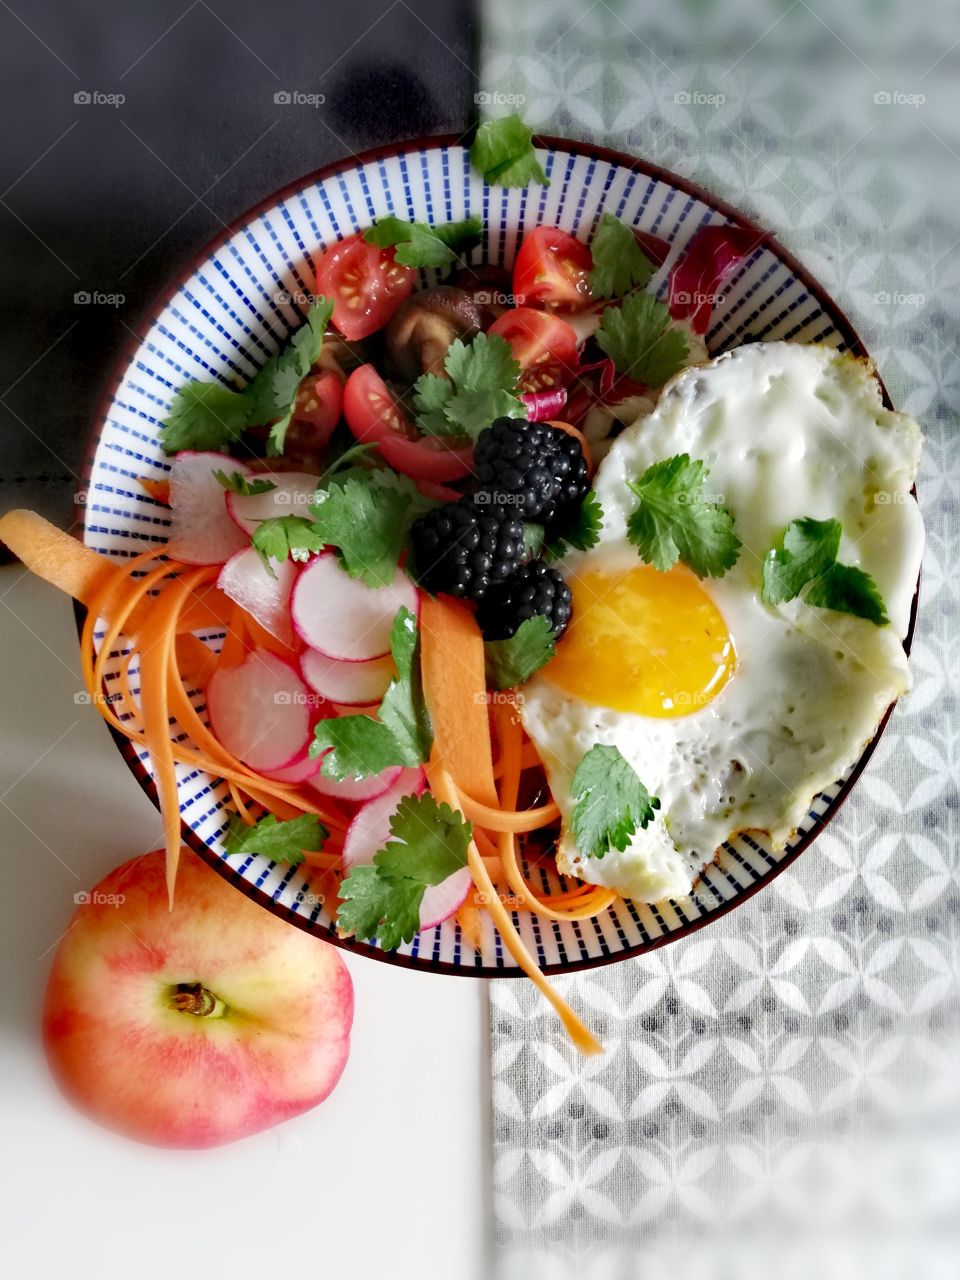 Bowl with fried egg, salad and berries, next to a peach